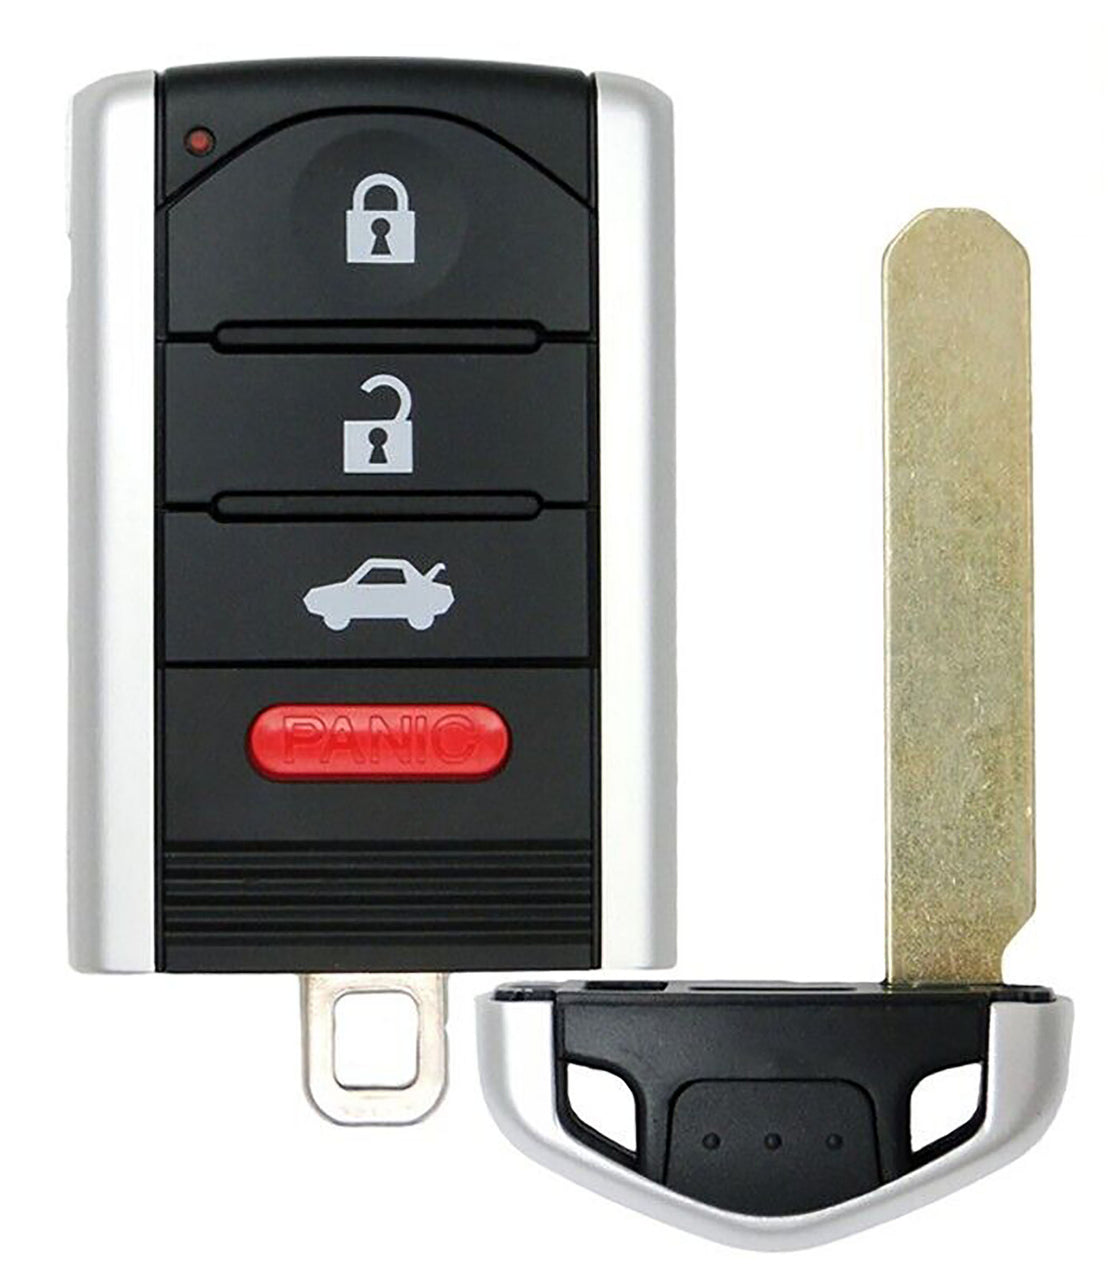 1x New Replacement Proximity Key Fob Compatible with & Fit For Acura Vehicles (Check Fitment) - MPN KR5434760-04